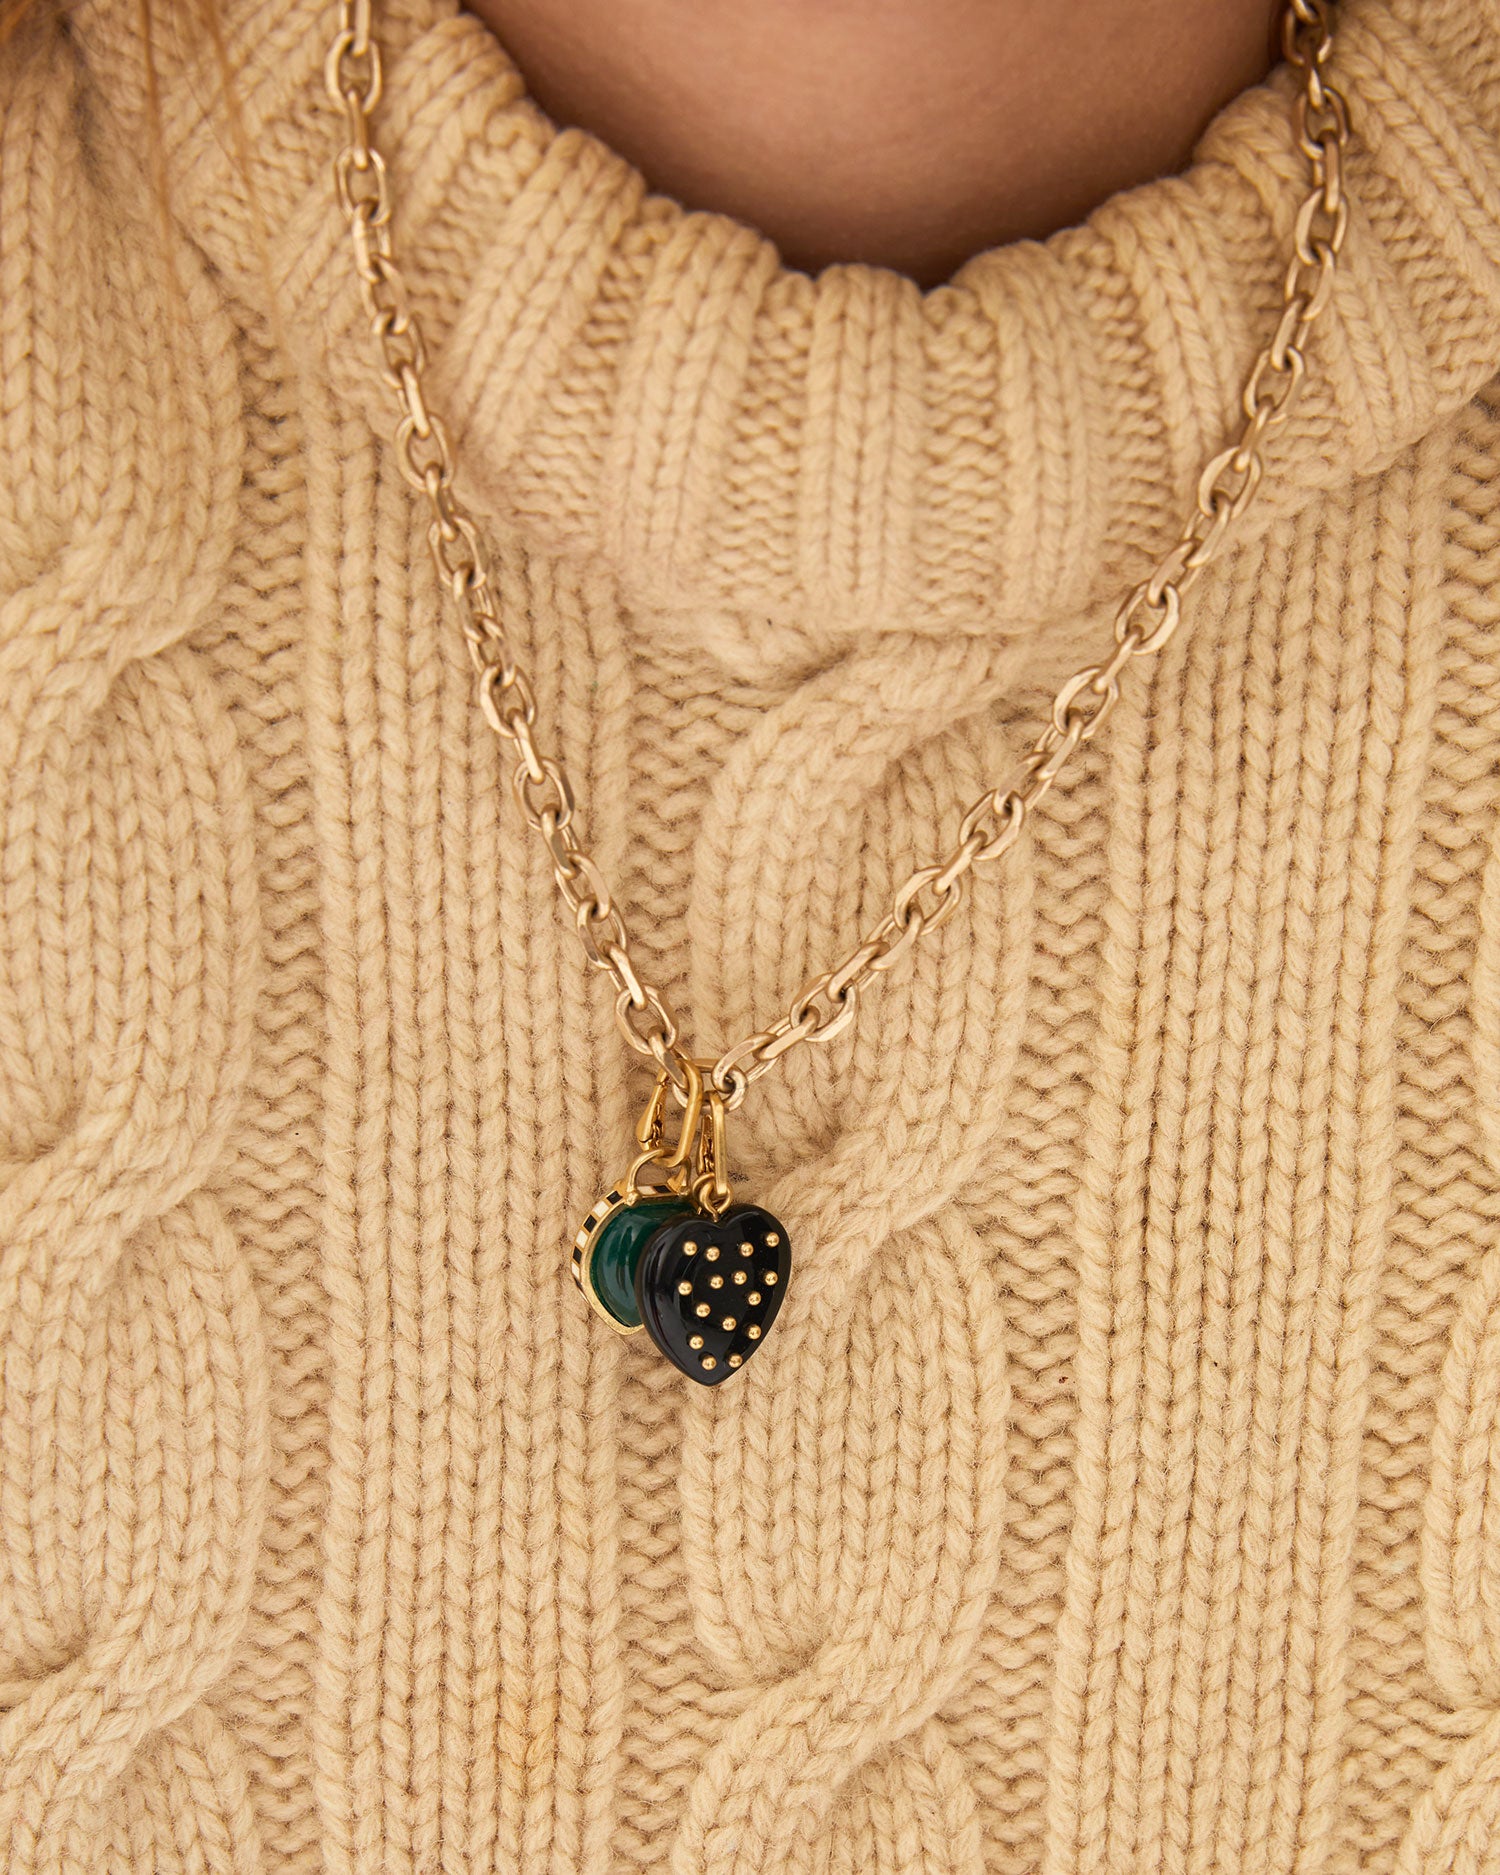 Aurelia wearing the Black Onyx Studded Stone Heart Charm on the charm chain necklace with another CV charm